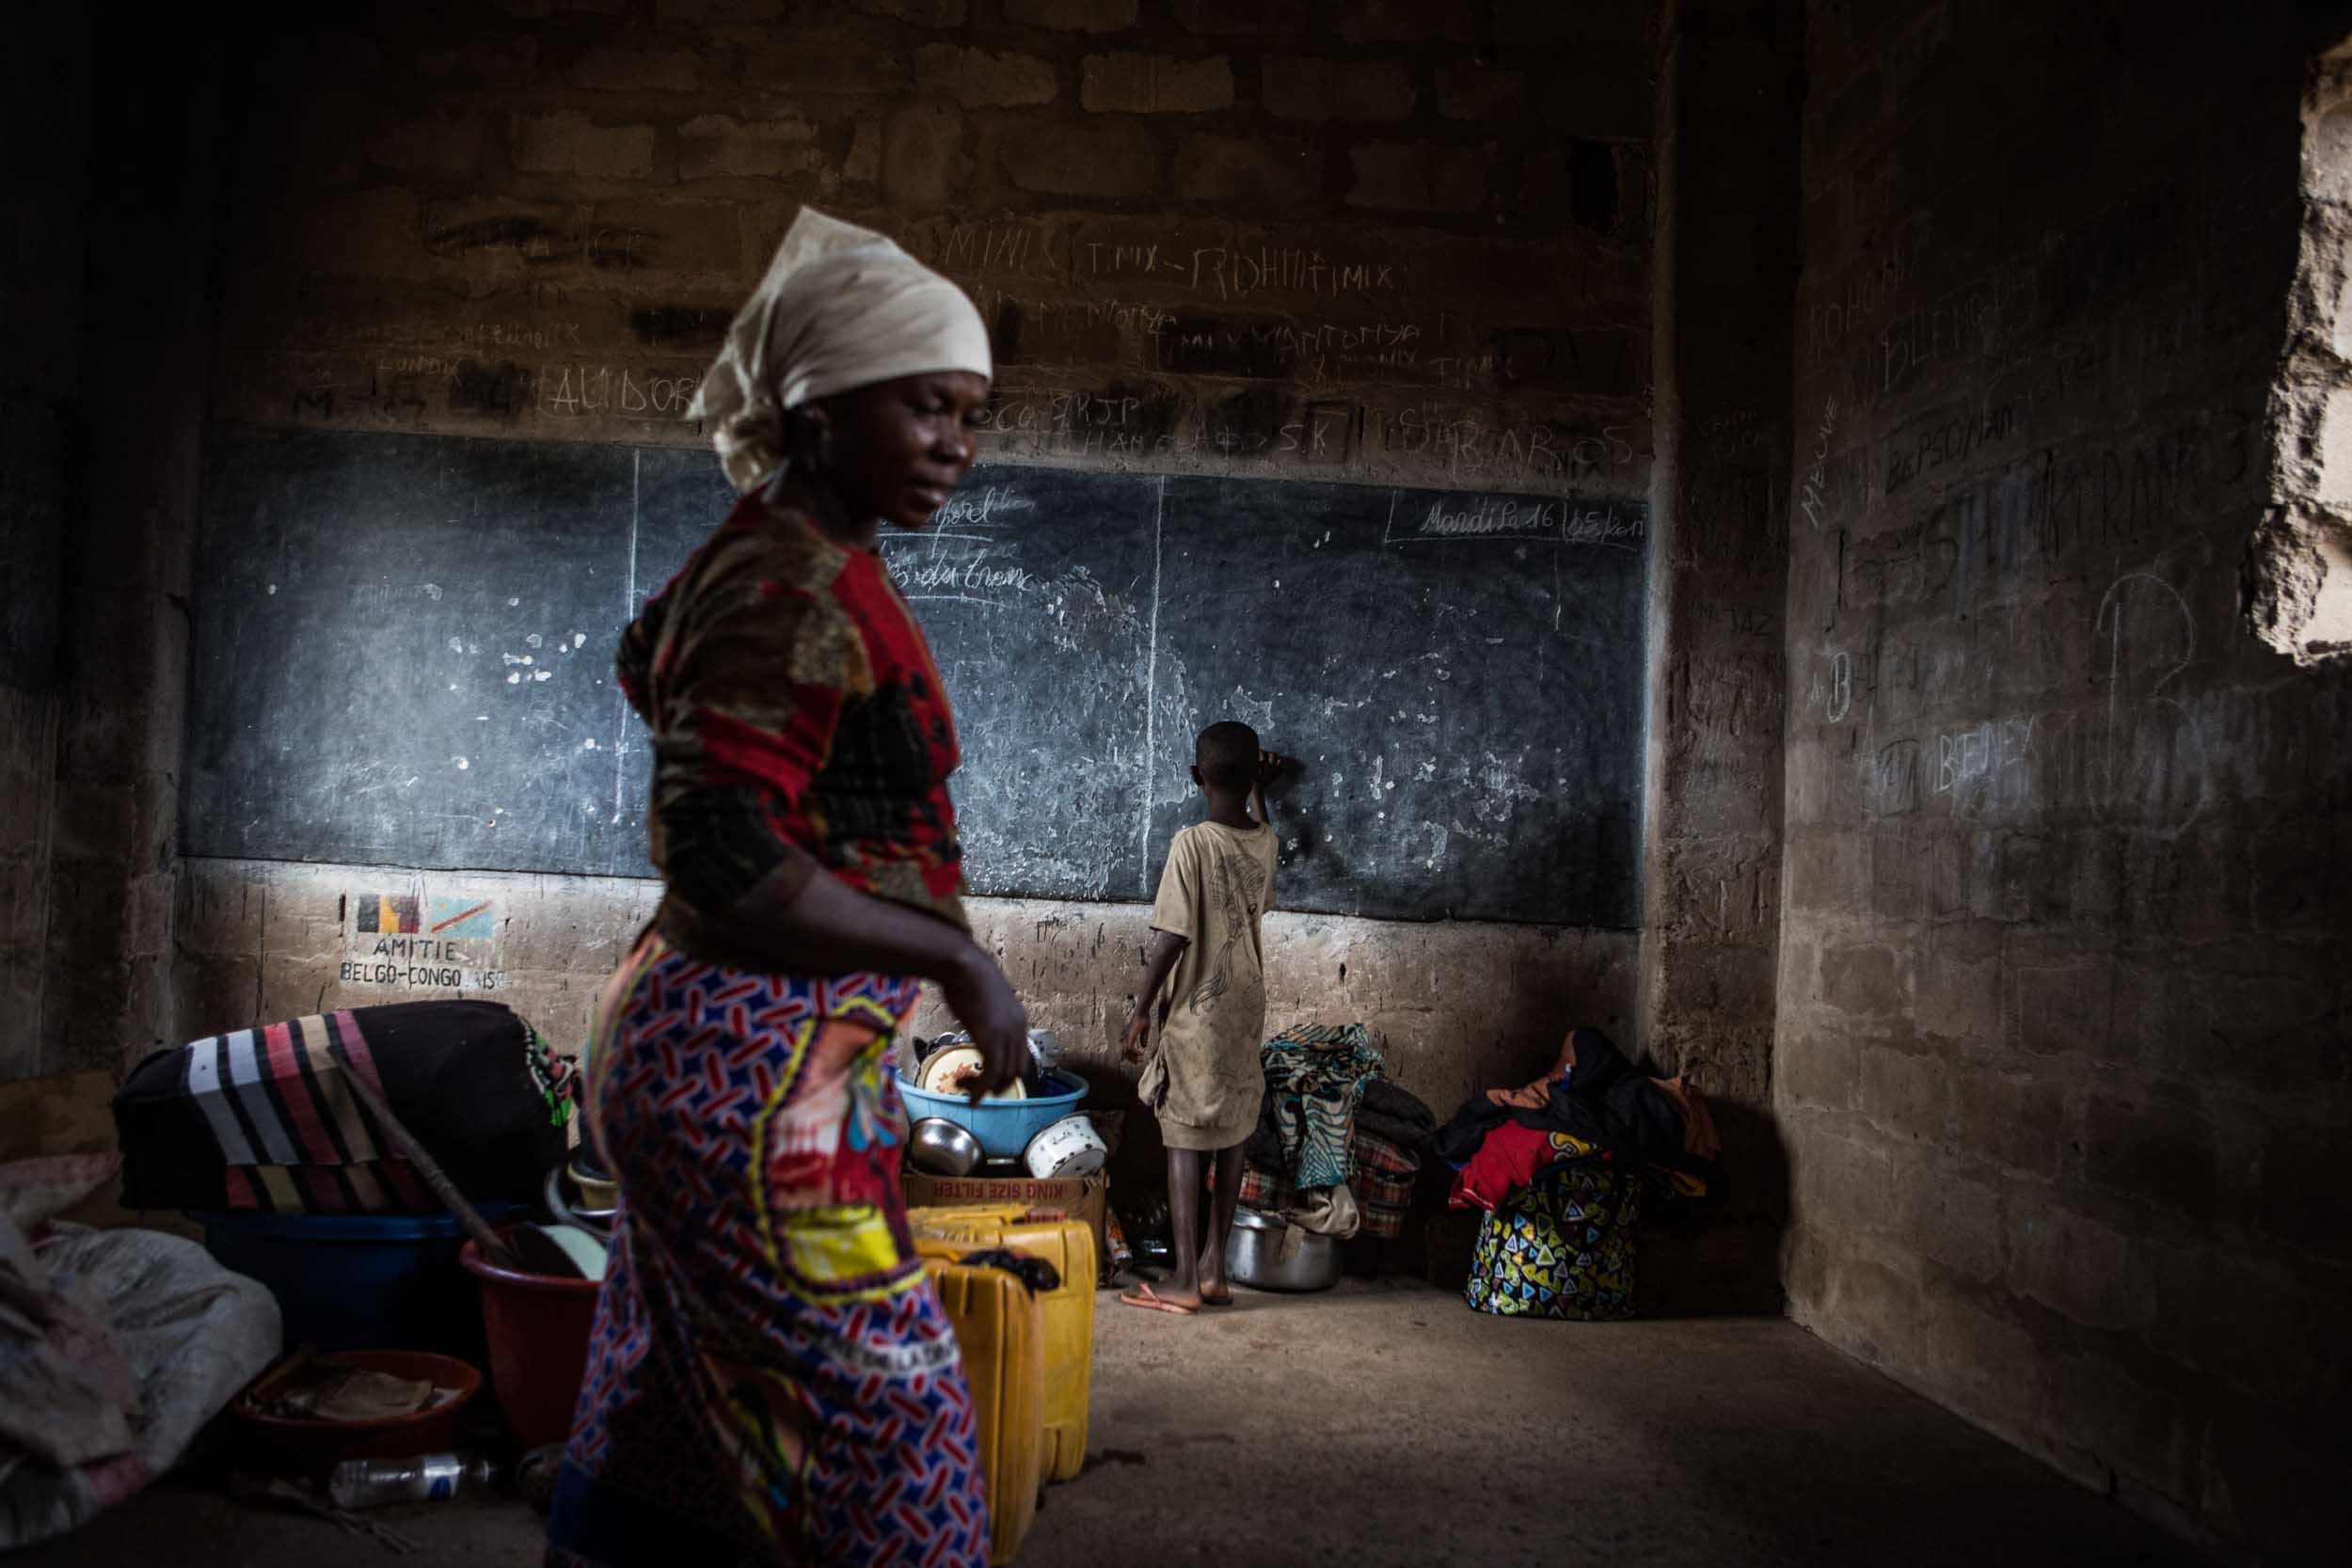  A Bantu woman and child in one of the rooms of the Circle Filtsaf primary school in Kalemie, where they found shelter after escaping the violence in their home village of Tabacongo. They arrived here at the beginning of May and are waiting to be rel